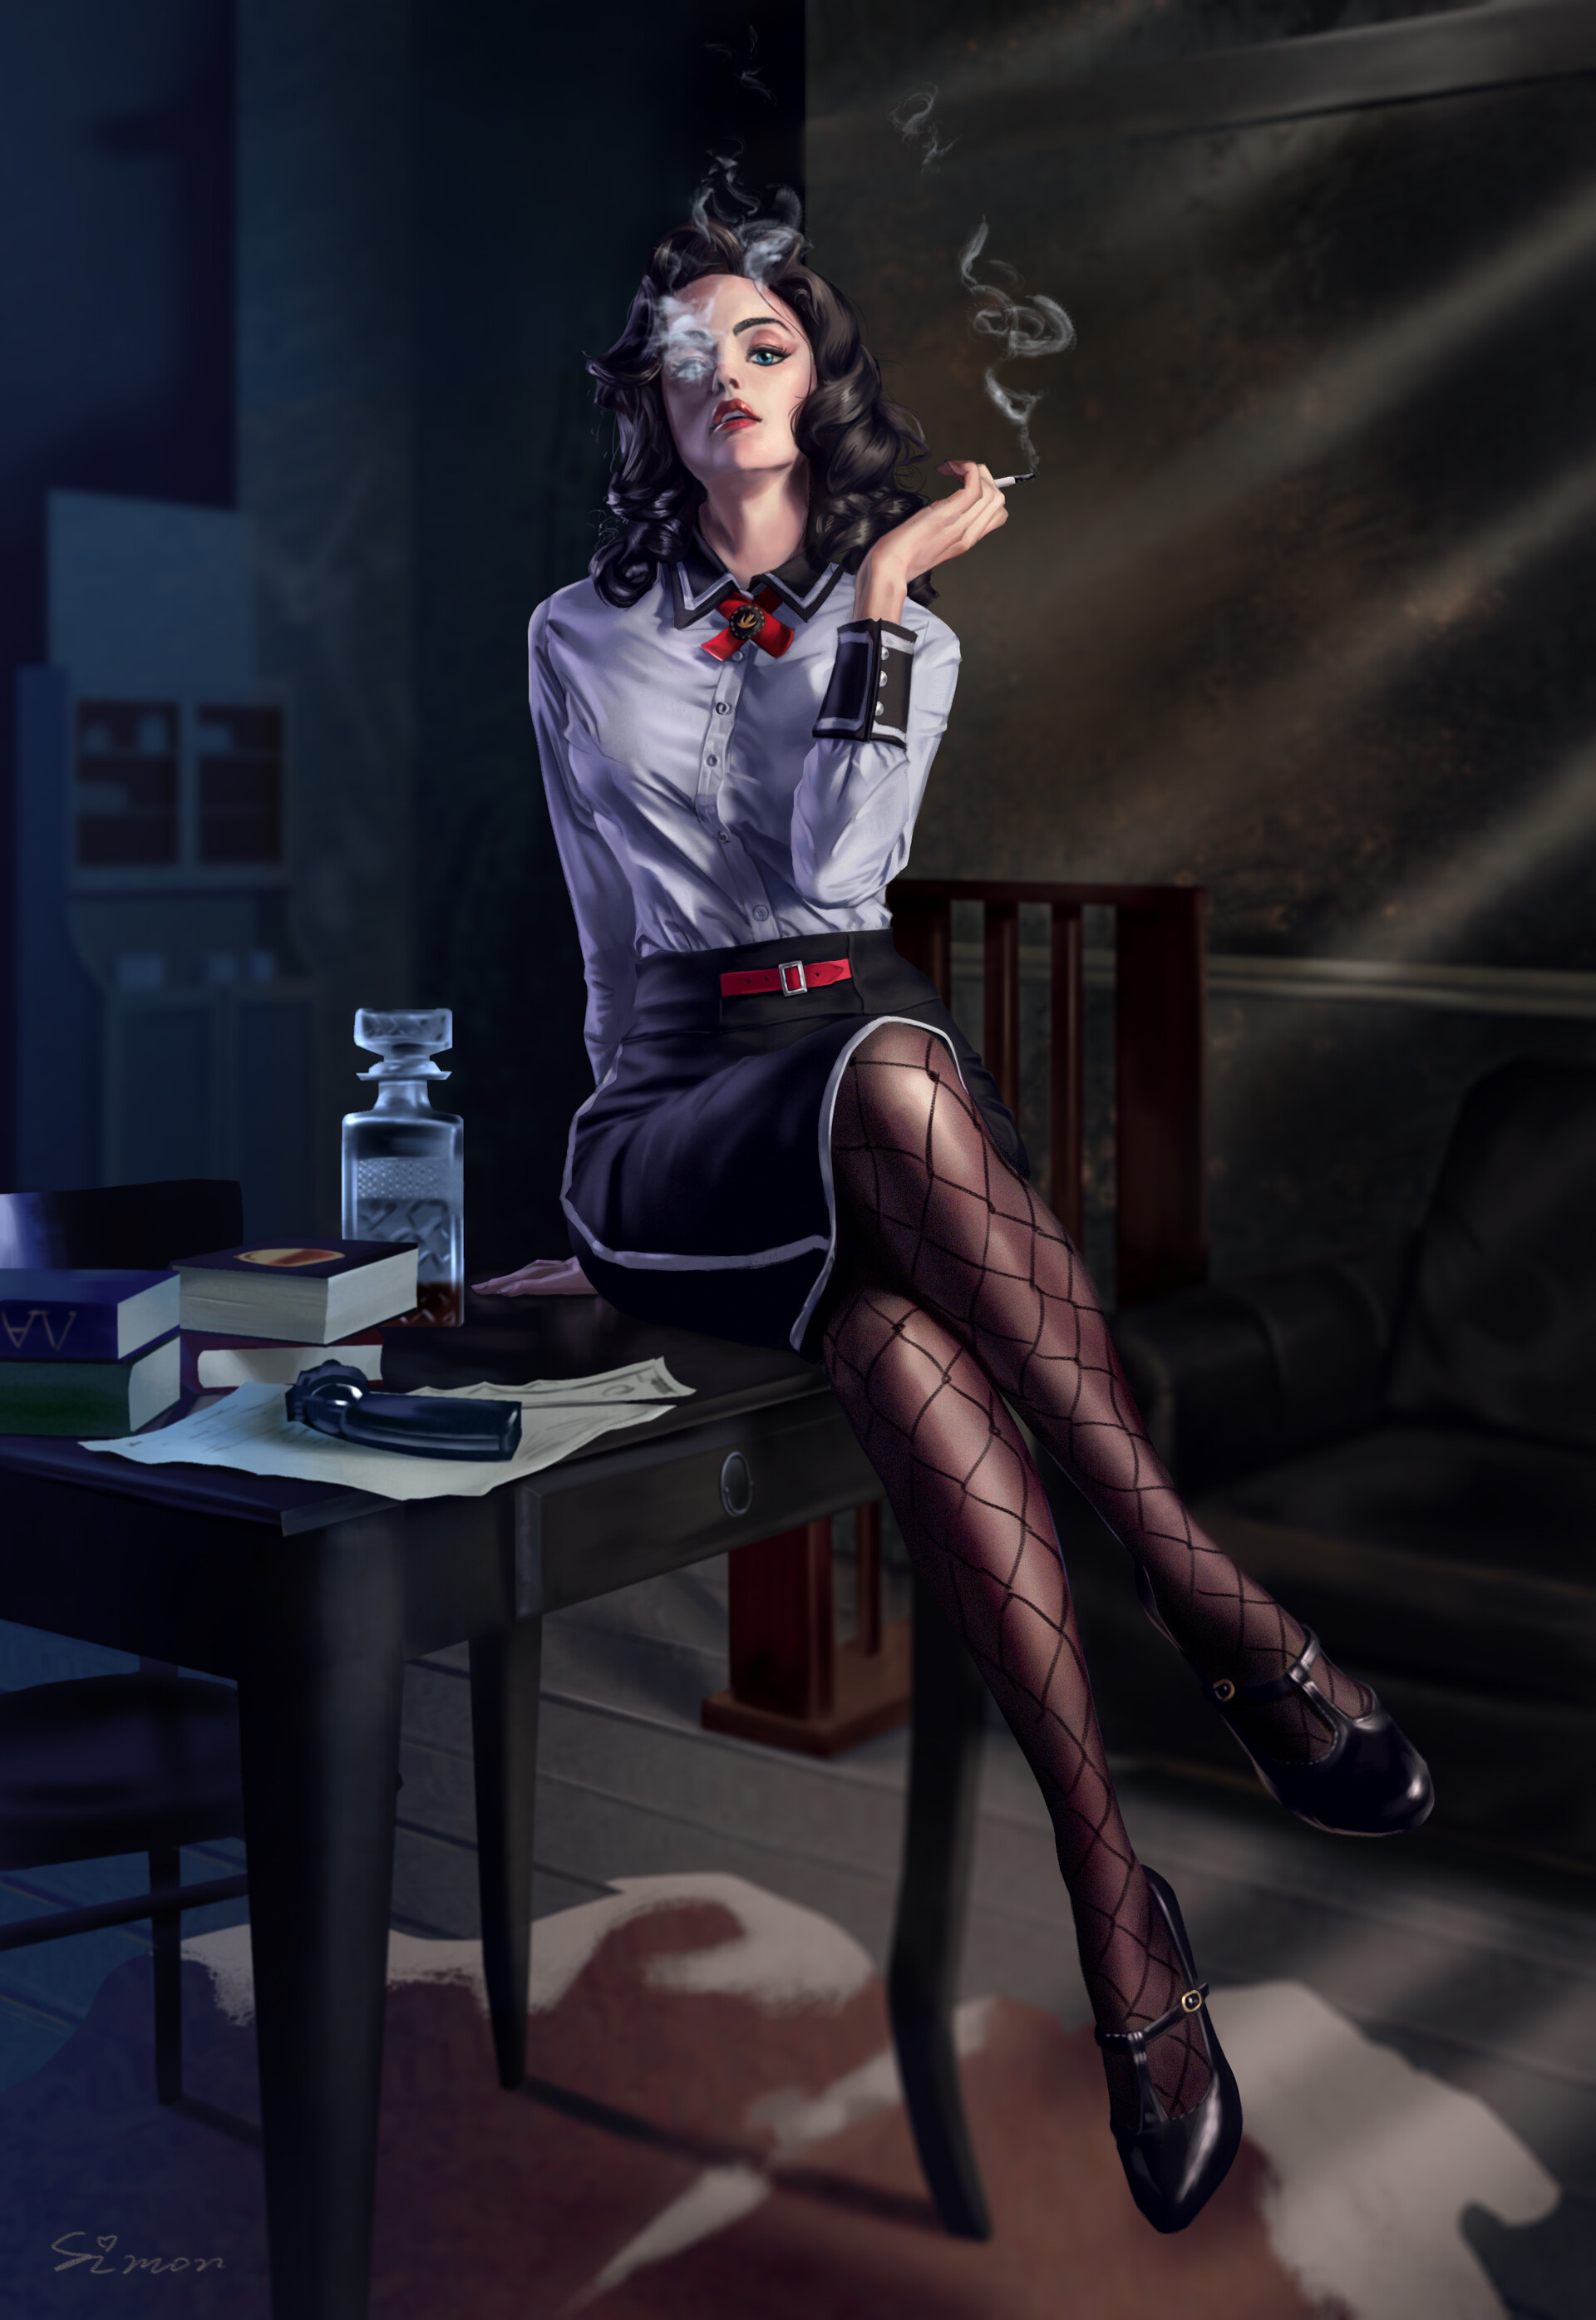 Simon Si Vertical Sitting On The Table Indoors Sitting On Desk Artwork Noir Video Game Characters Gu 1920x2791